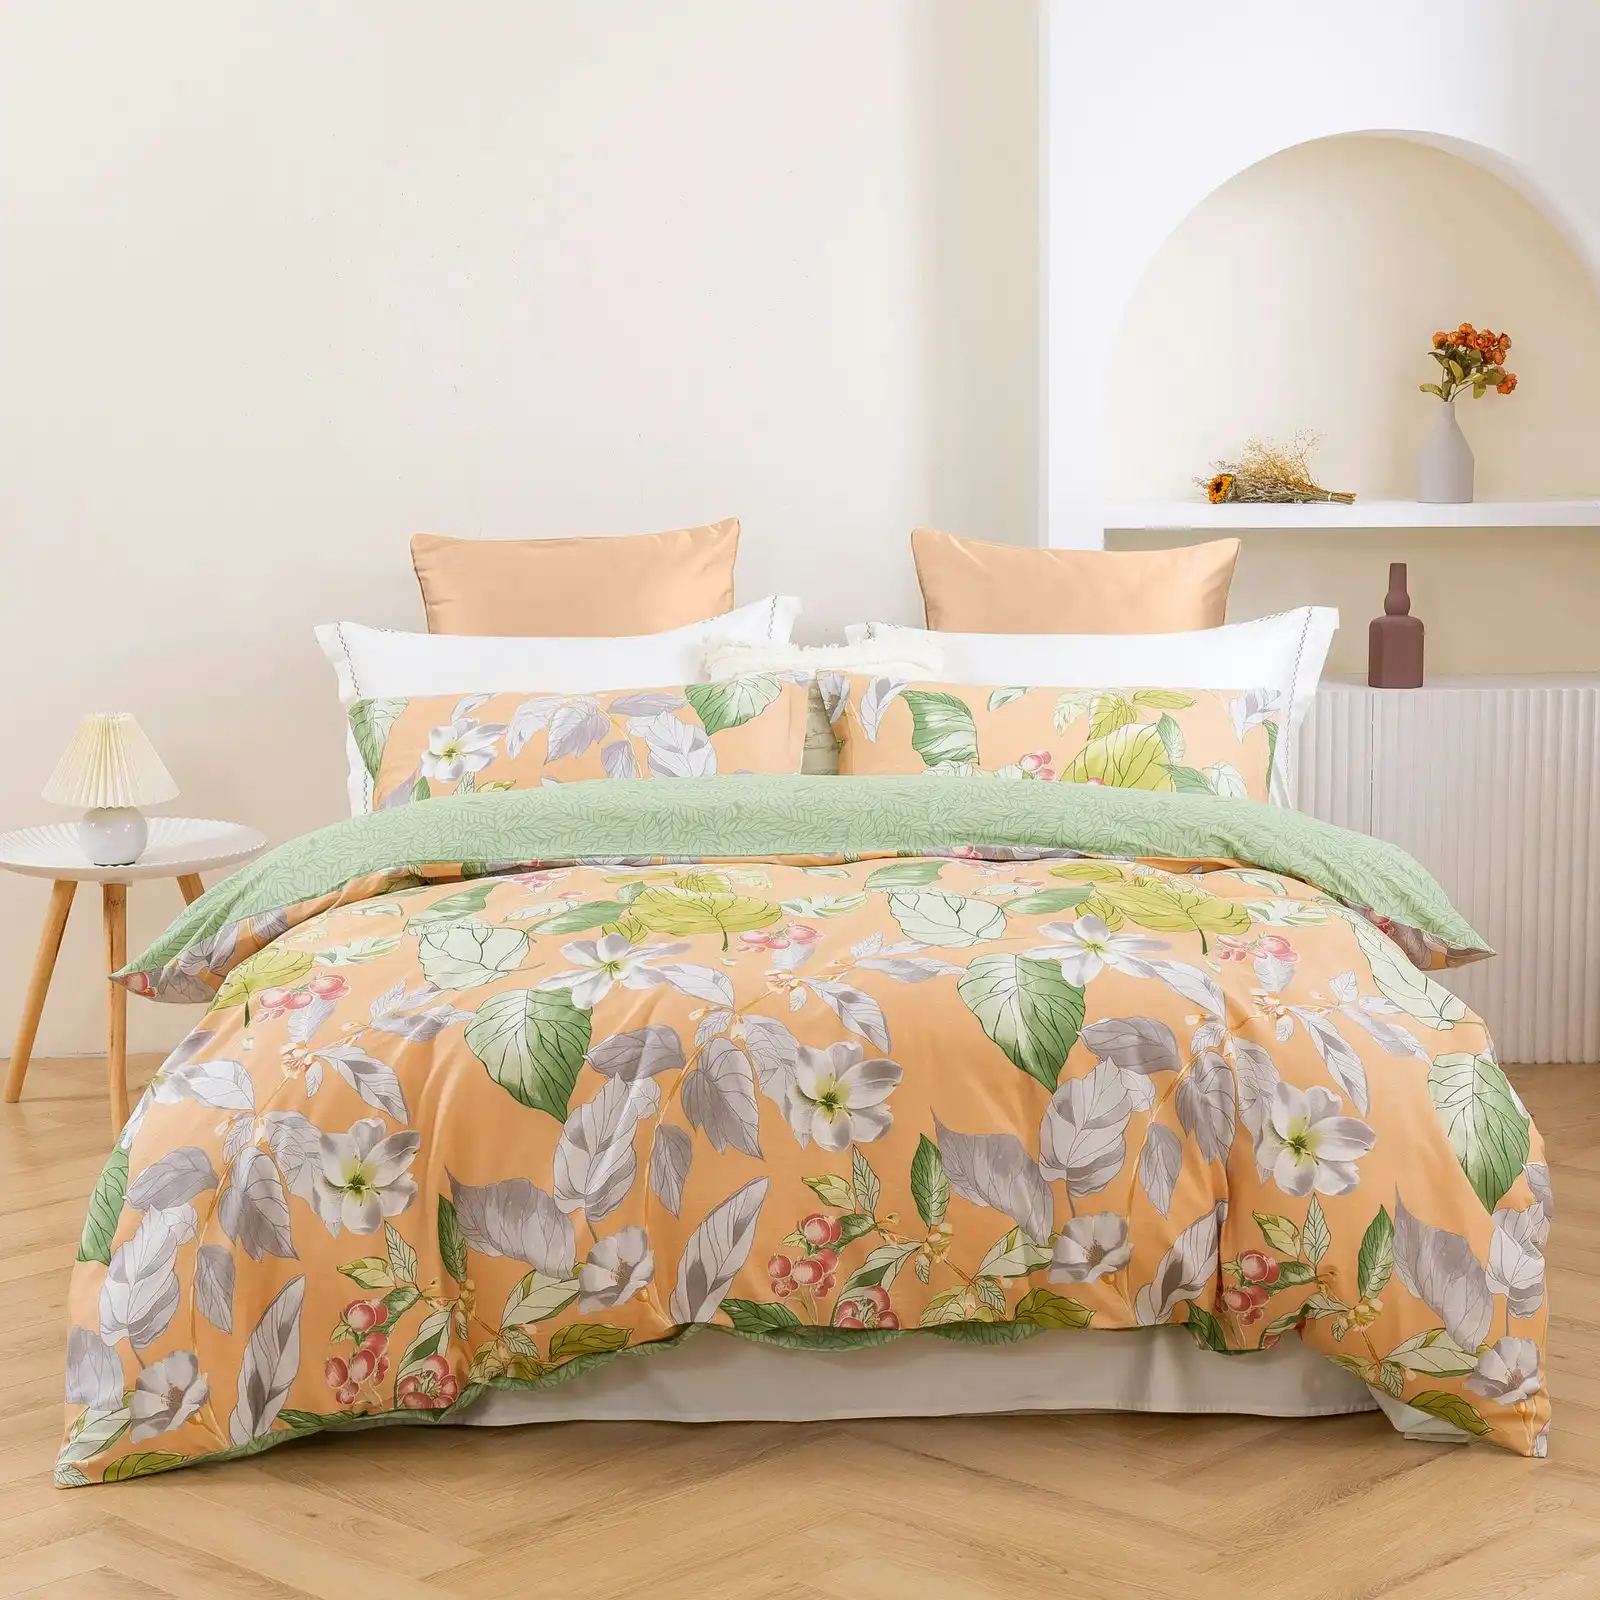 Dreamaker Peach Lily 100% Cotton Reversible Quilt Cover Set Queen Bed